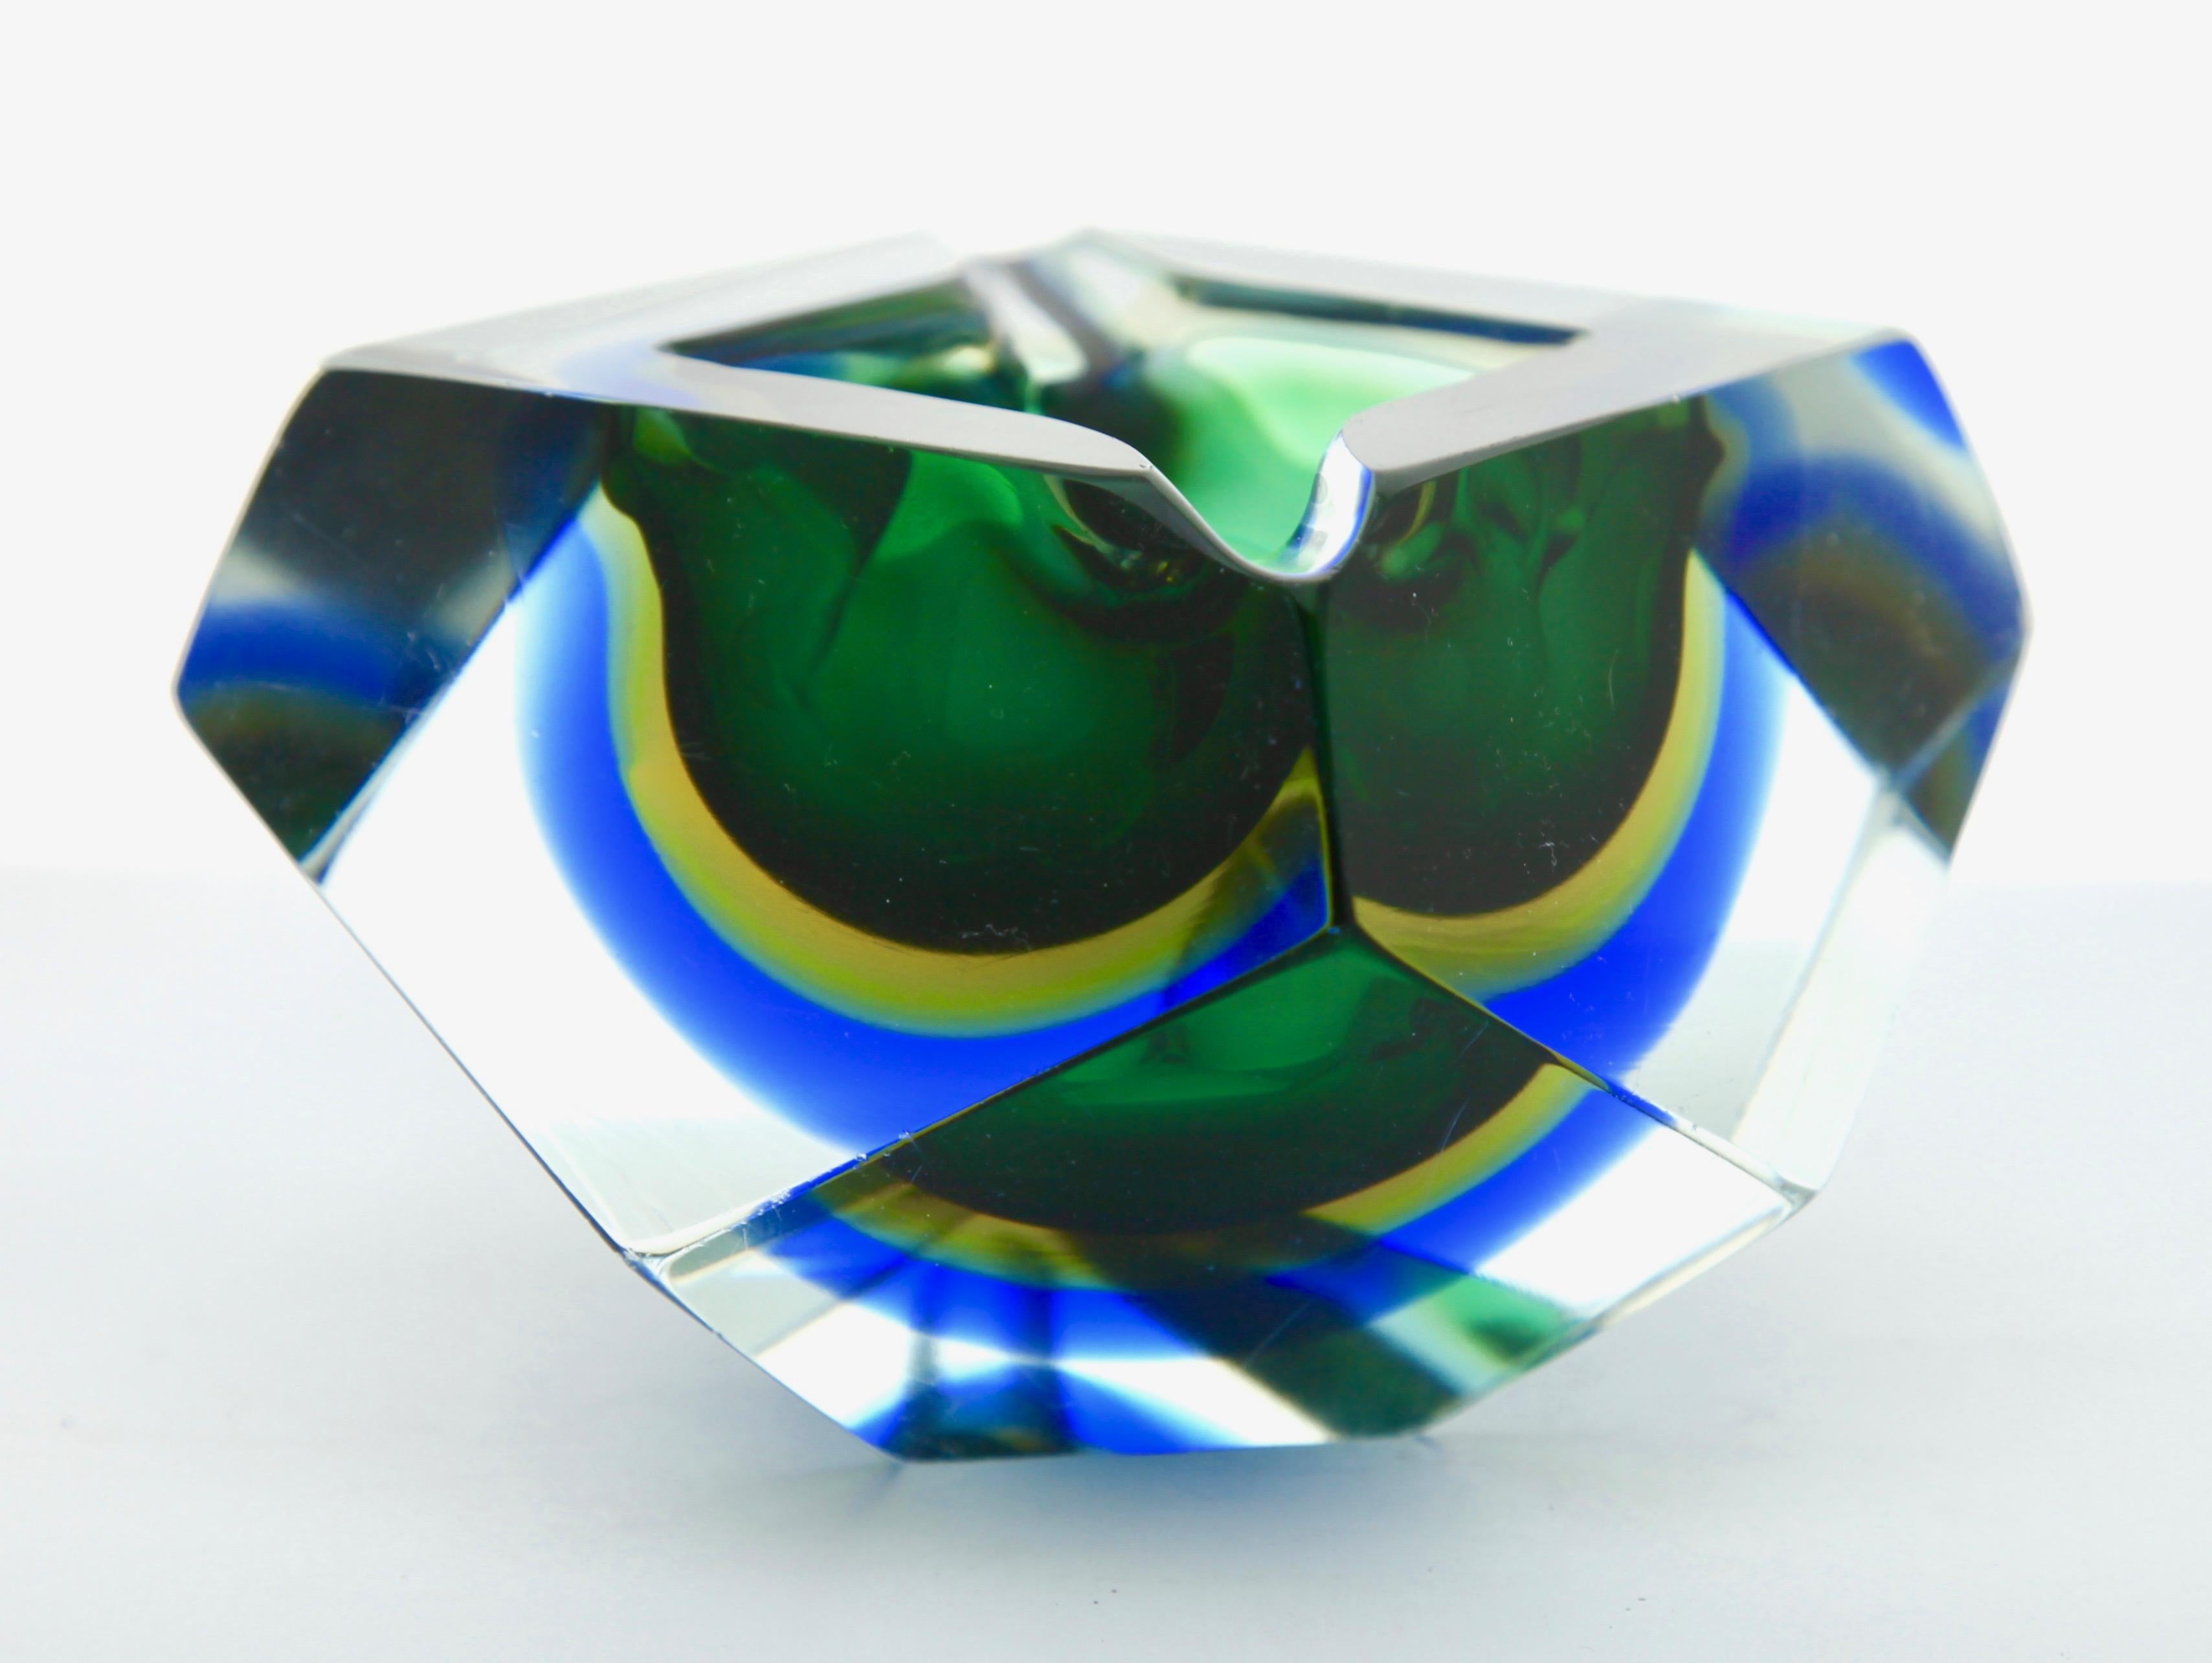 Attributed to Mandruzzato, this facetted block bowl with sectional cuts has a green core surrounded by amber and cobalt blue halos, bringing a dramatic contrast into your color scheme.
Still in lovely condition with only a few light scratches under